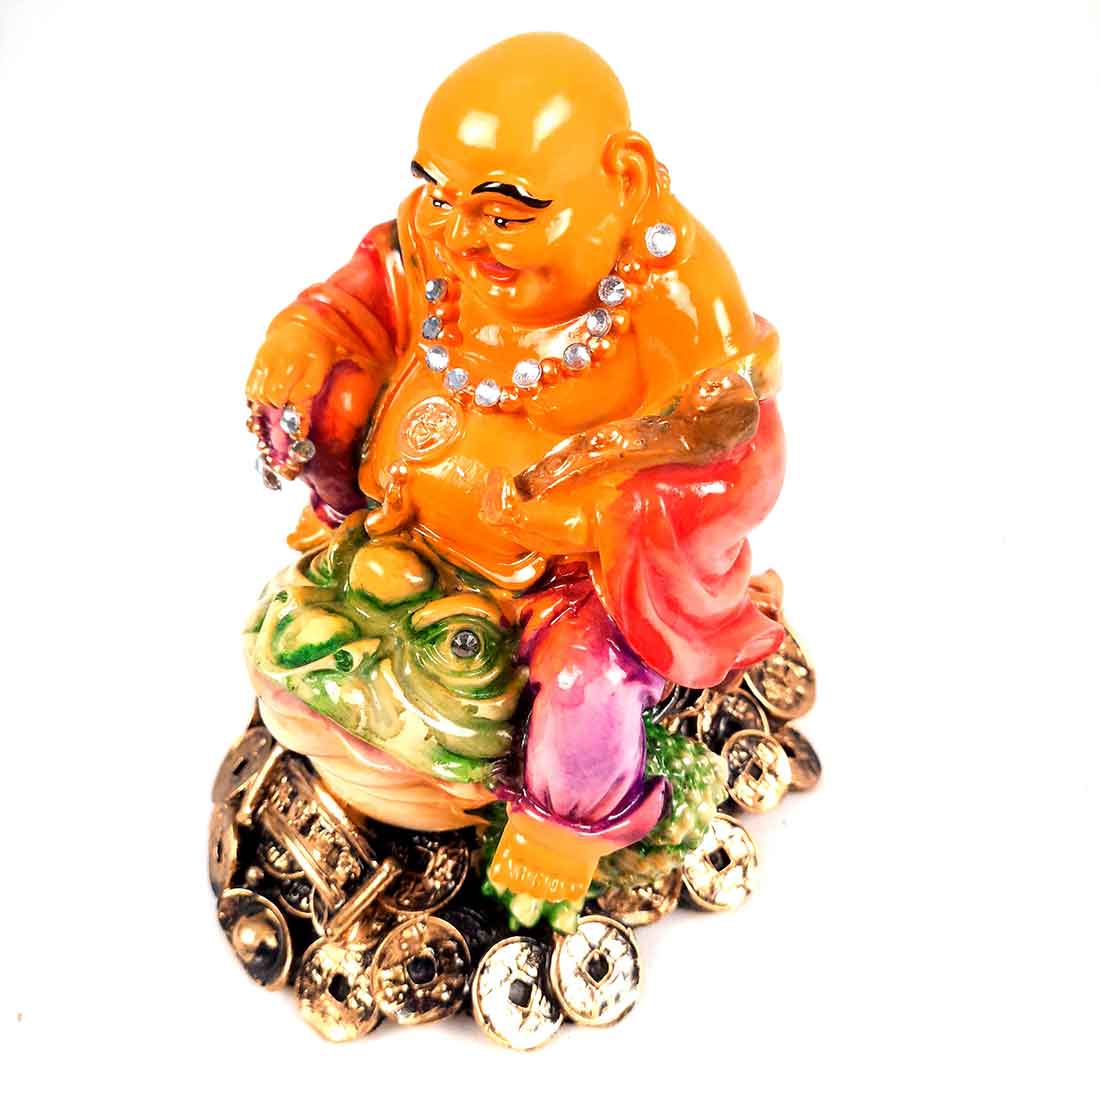 Laughing Buddha Showpiece | Laughing Buddha Statue - Sitting On Feng Shui Frog Design - for Good Luck, Money, Prosperity & Wealth - Apkamart #Size_8 Inch